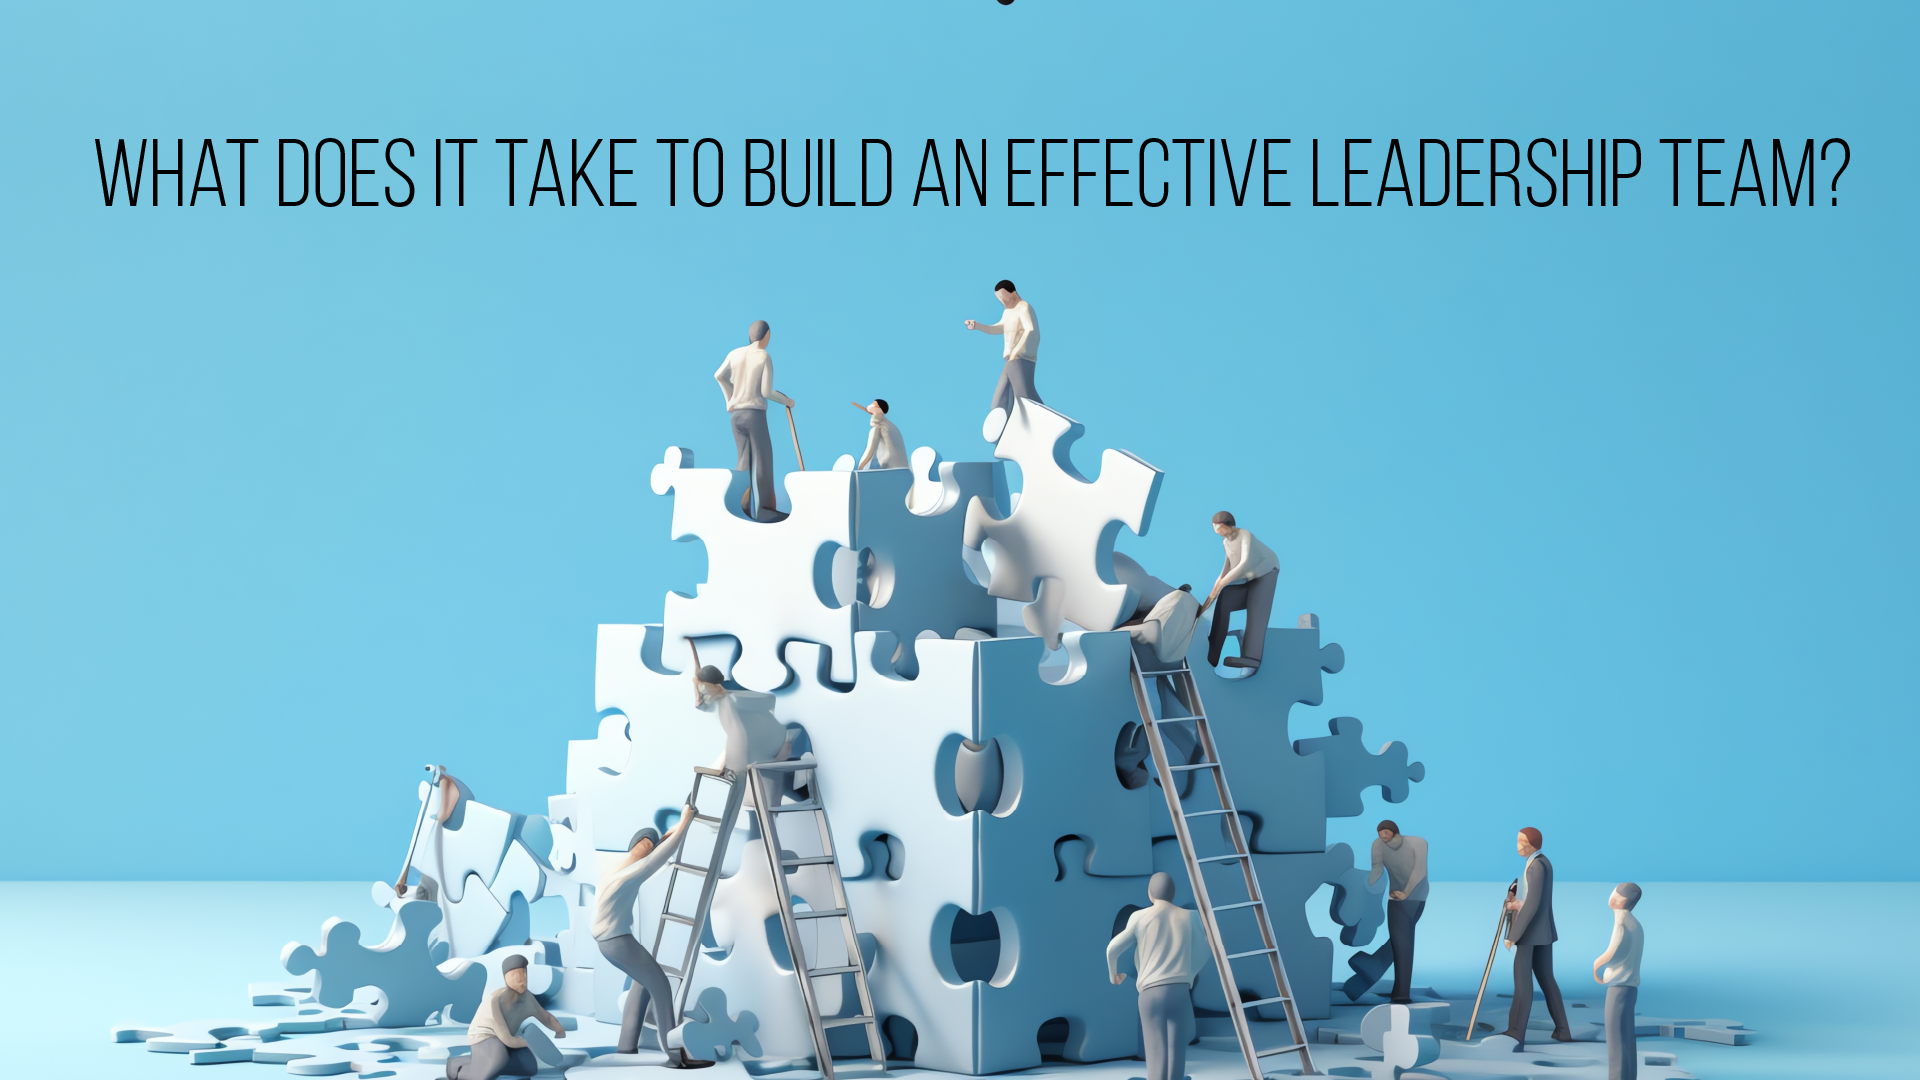 What Does It Take To Build an Effective Leadership Team?